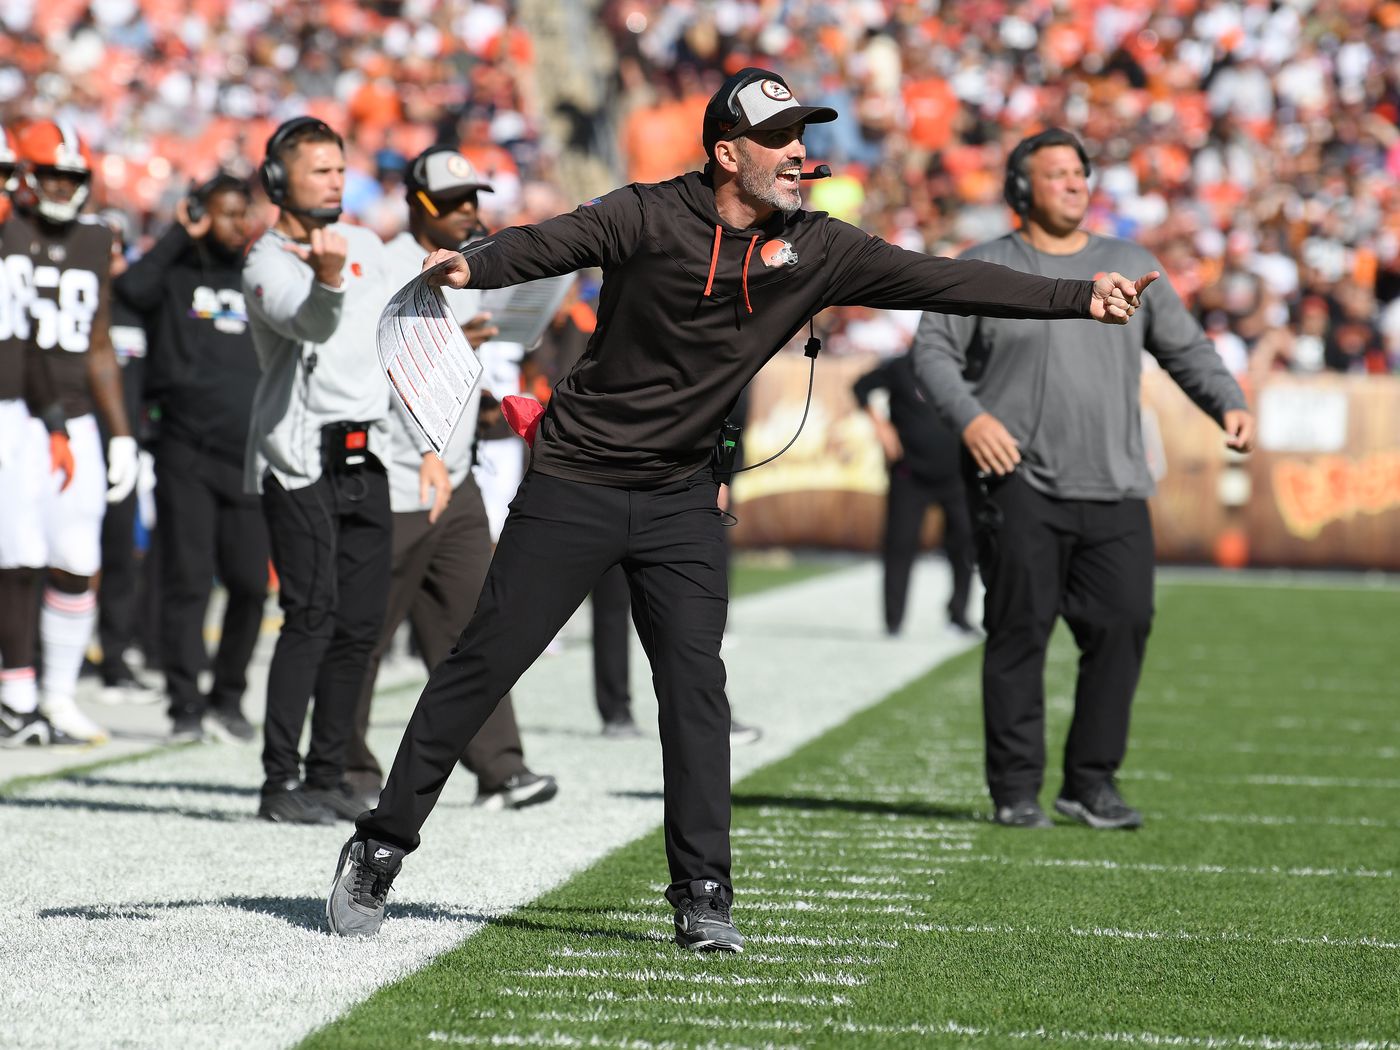 Cleveland Browns: 4 bold predictions for Week 7 vs. Ravens